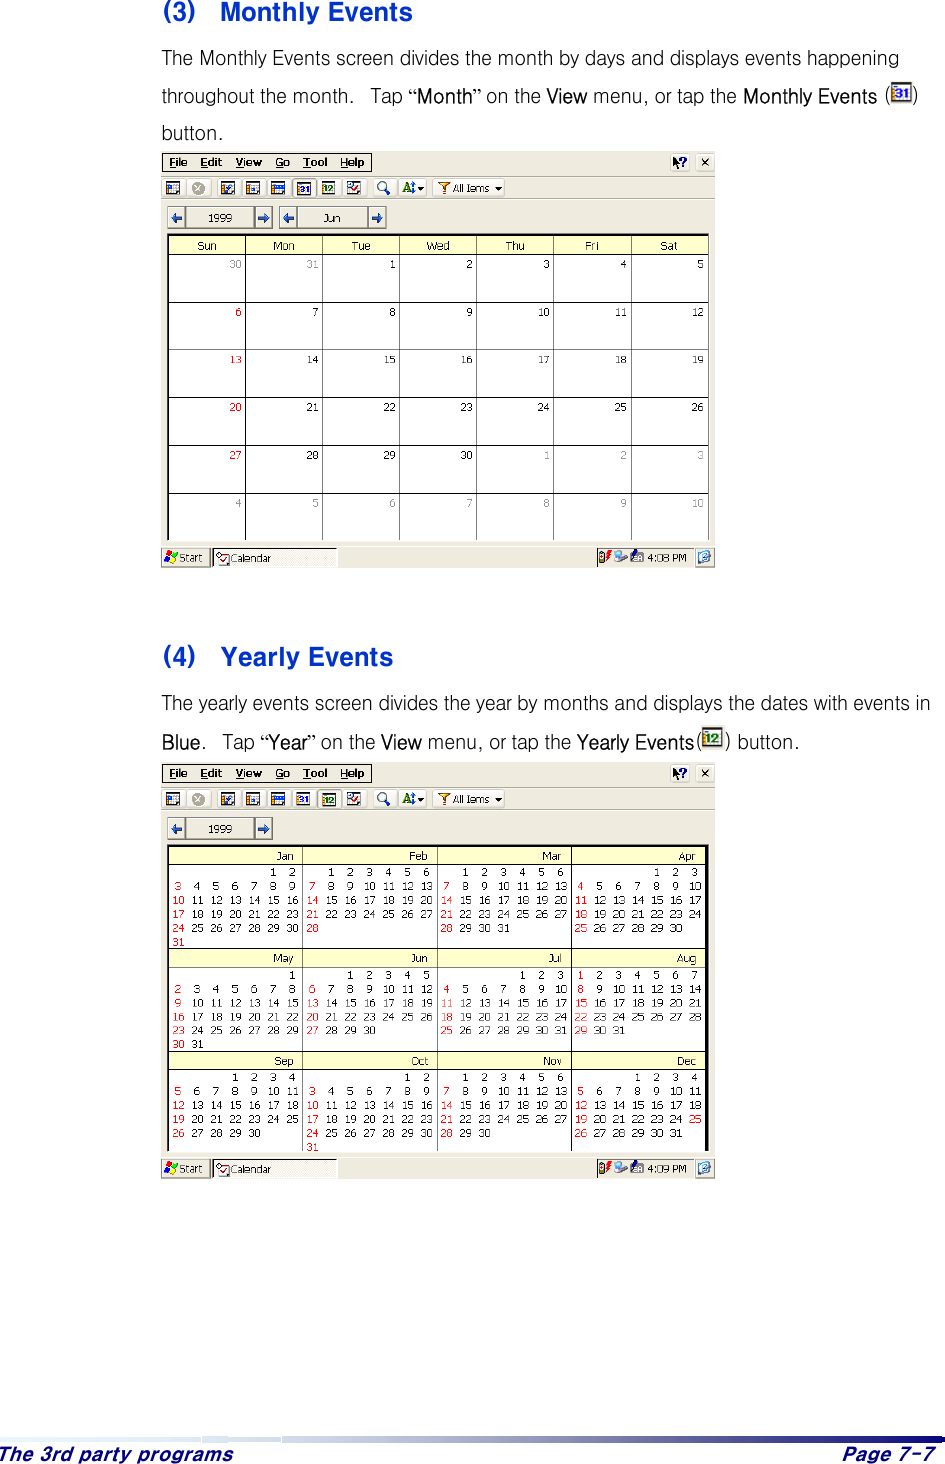 The 3rd party programs    Page 7-7   (3)  Monthly Events   The Monthly Events screen divides the month by days and displays events happening throughout the month.  Tap “Month” on the View menu, or tap the Monthly Events ( ) button.              (4)  Yearly Events   The yearly events screen divides the year by months and displays the dates with events in Blue.  Tap “Year” on the View menu, or tap the Yearly Events() button.                   